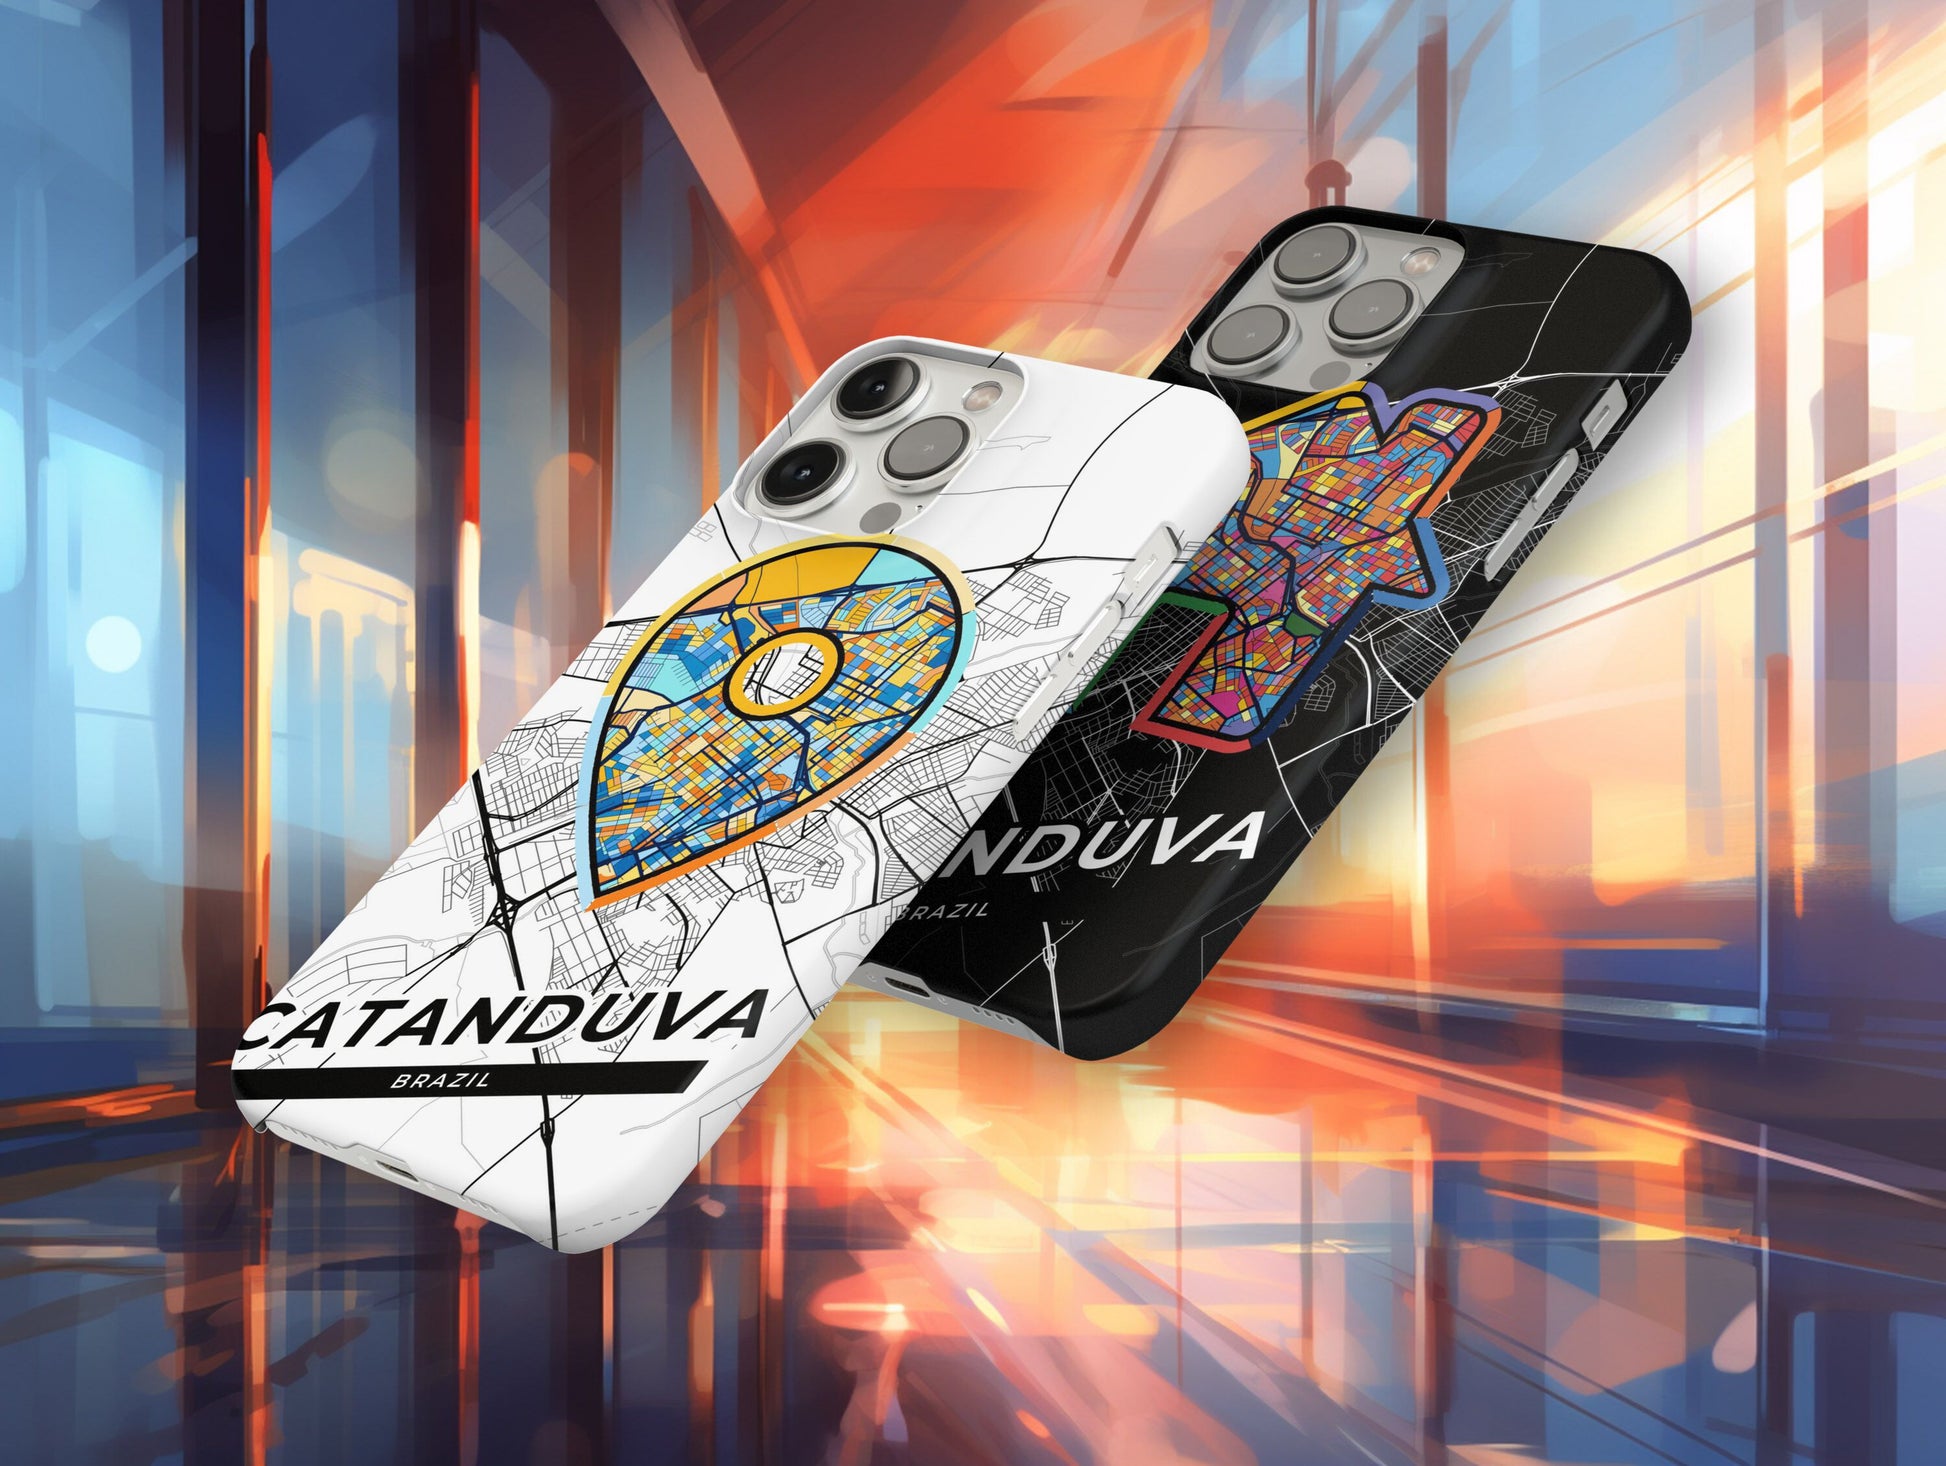 Catanduva Brazil slim phone case with colorful icon. Birthday, wedding or housewarming gift. Couple match cases.